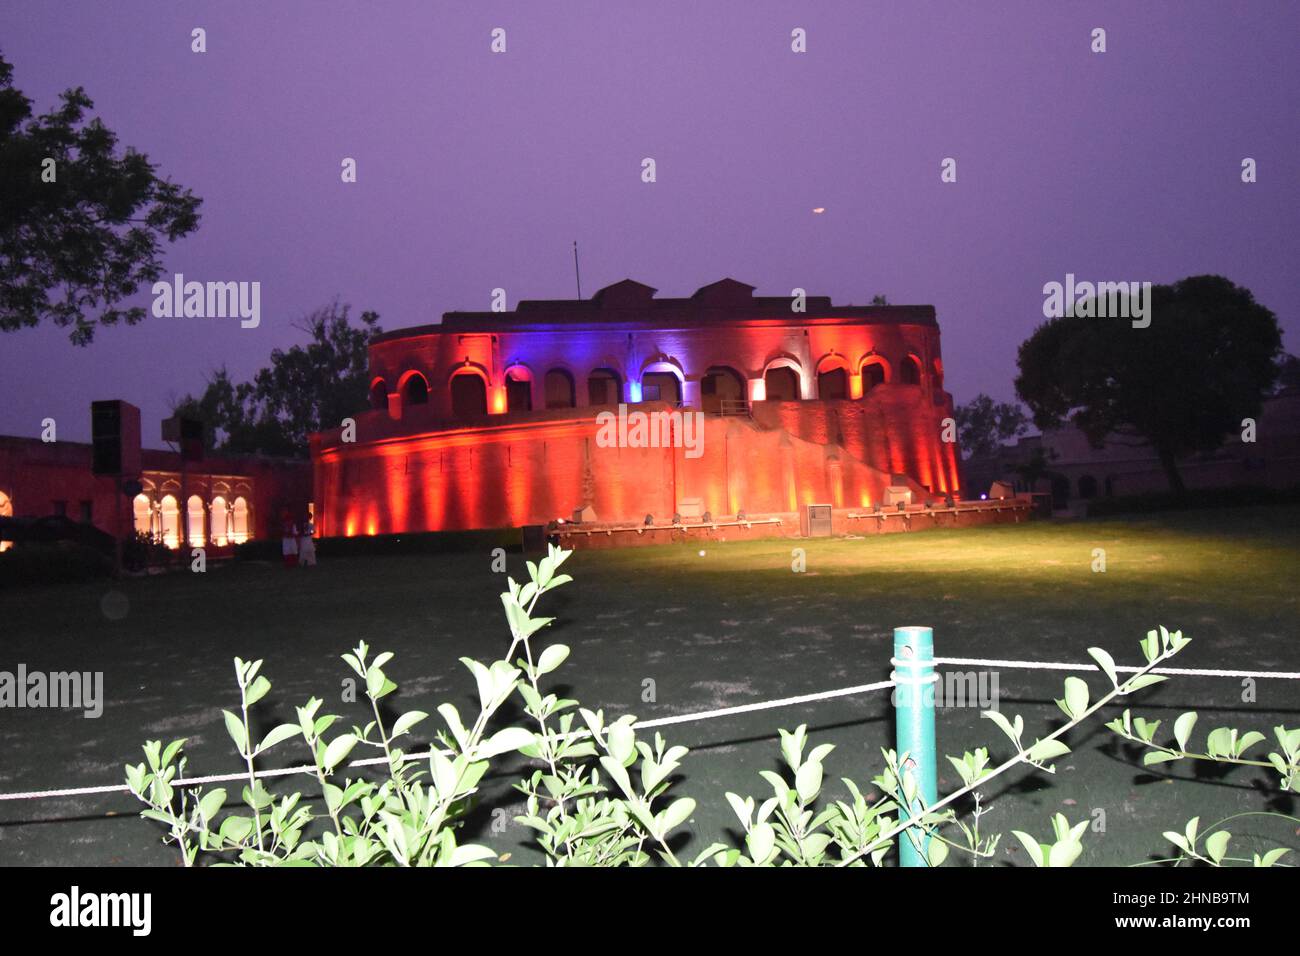 Amritsar, Punjab, India- August 6, 2019: The Gobindgarh Fort, which was built as a military fort over 300 years ago. Stock Photo